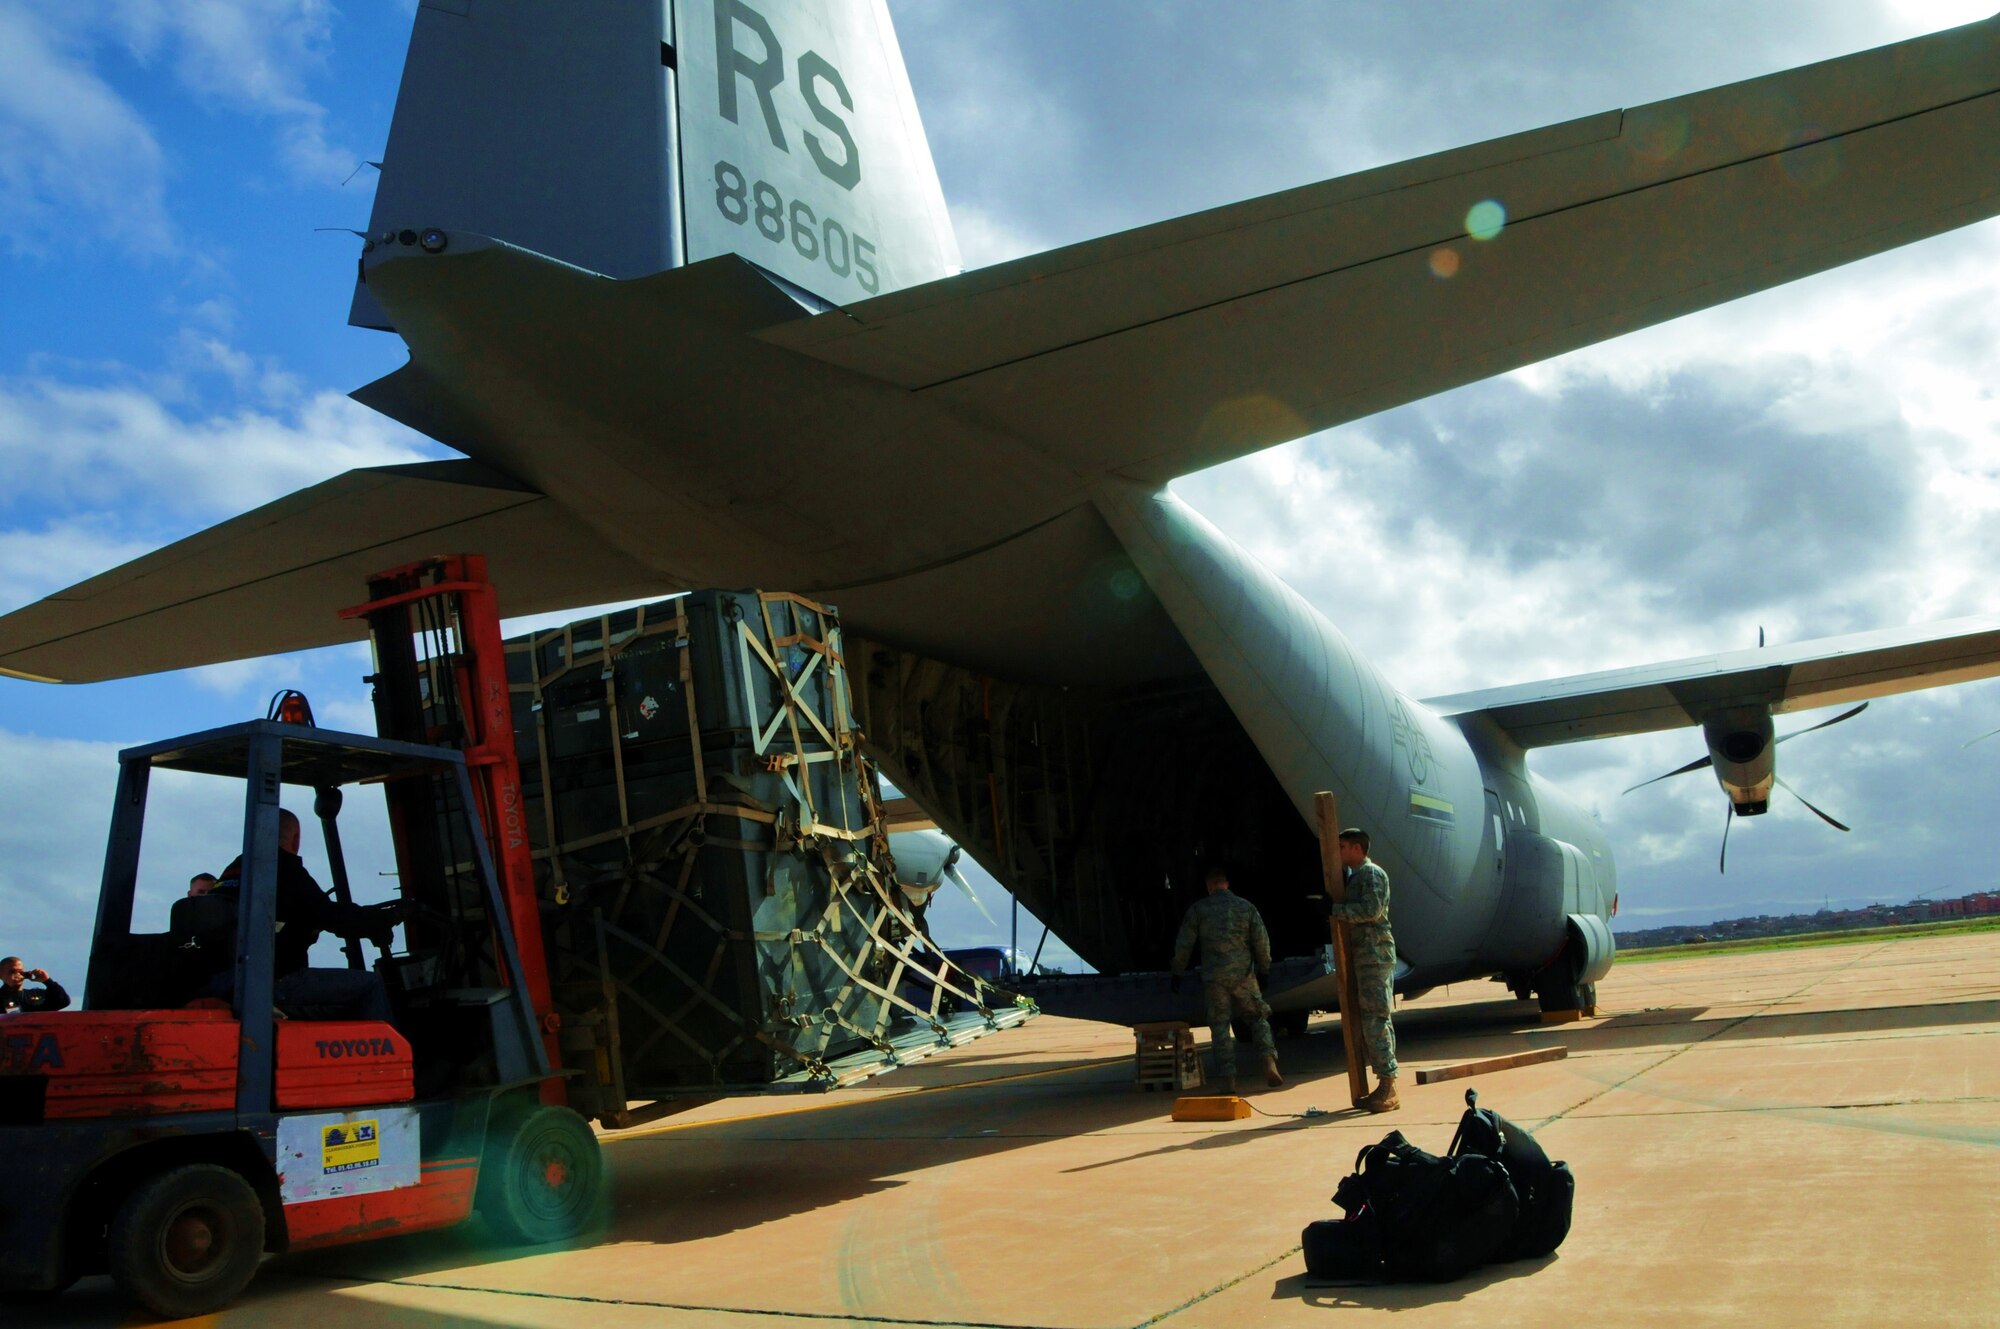 MARRAKECH, Morocco -- Cargo is removed from a C-130J Super Hercules on the Marrakech, Morocco flightline Jan. 23. The C-130J, from the 37th Airlift Wing at Ramstein Air Base, Germany, arrived for the Morocco Aeroexpo 2010. U.S. Air Force units based in the states and Europe have arrived for the event to showcase their aircraft, learn from military counterparts and building lasting relationships with African nations. Counterparts from more than 40 countries are scheduled to attend the Aeroexpo. (U.S. Air Force photo by Staff Sgt. Stefanie Torres)